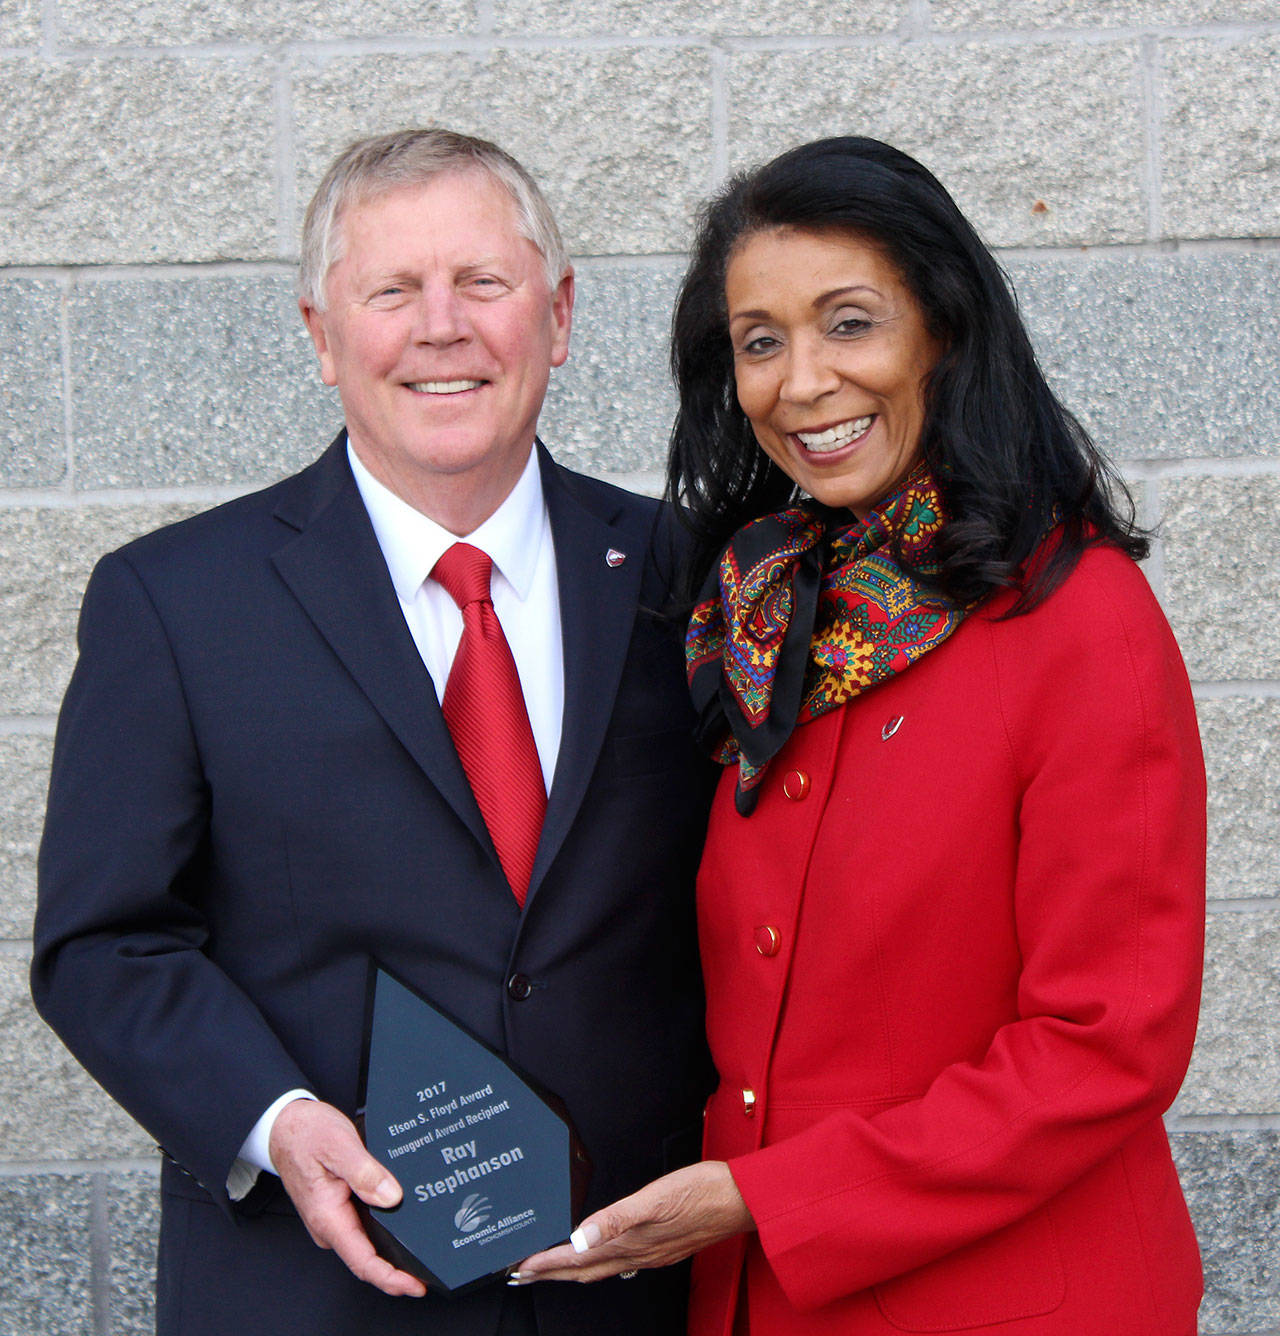 Everett Mayor Ray Stephanson poses with Carmento Floyd, the wife of Elson S. Floyd, the former Washington State University president who died nearly two years ago. Stephanson was given the inaugural Elson S. Floyd Award on Thursday at Tulalip Resort & Casino. (Contributed photo)